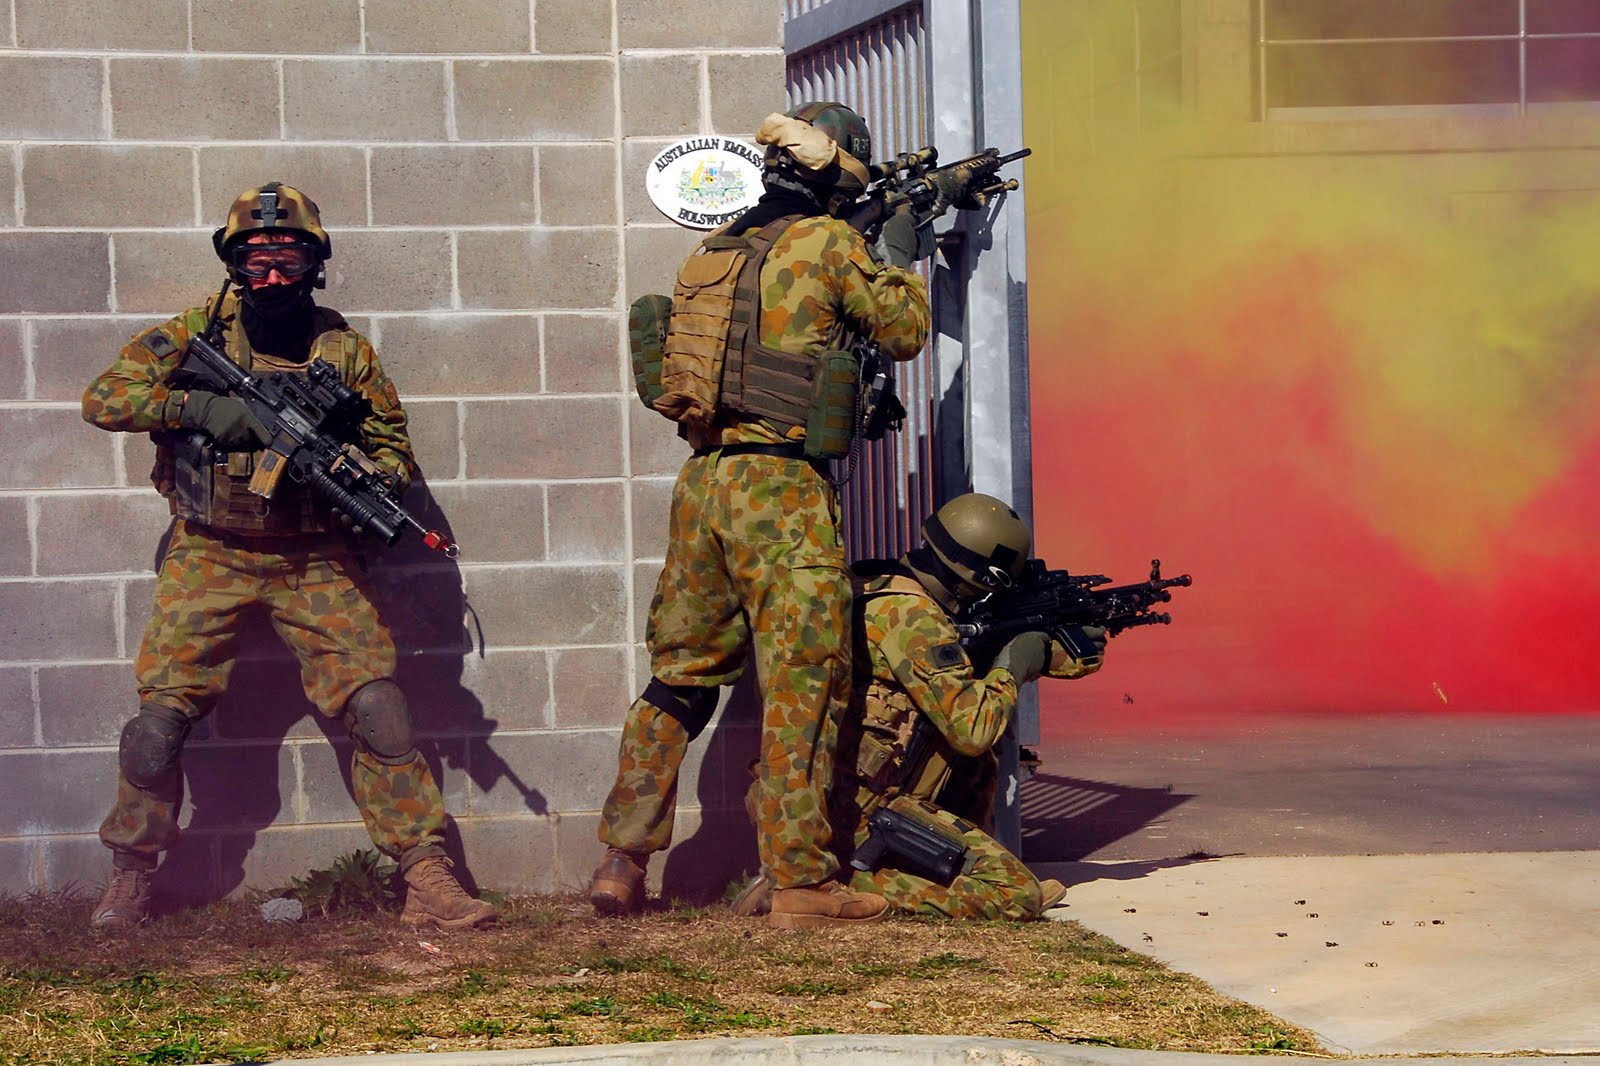 Tactical Assault Group East. Special Operations Unit - Signal Forces. Картинки z v армия. Australian Special Forces что это Tactical Assault Group эмблема. Operation unit